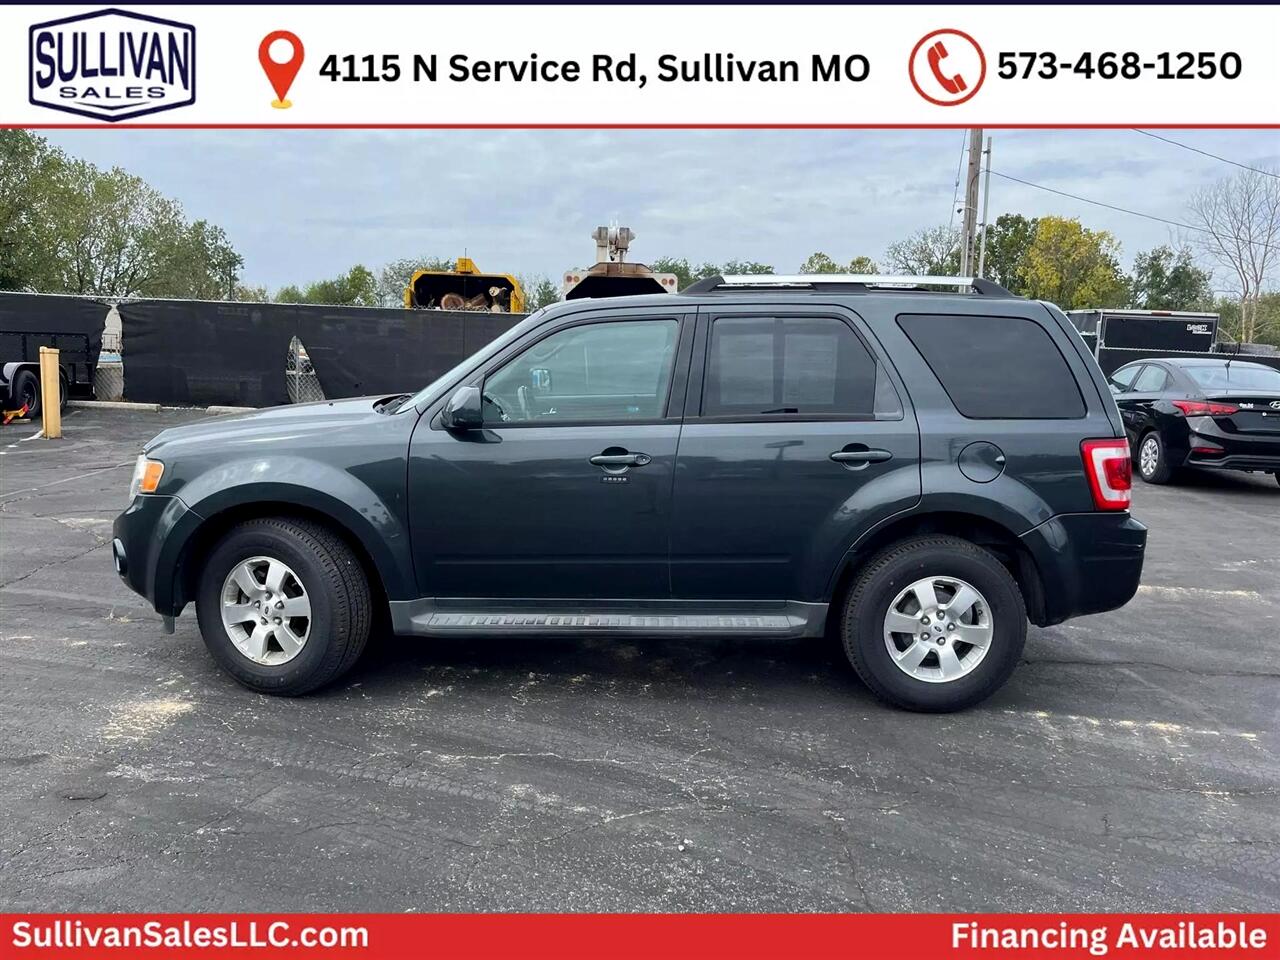 Used 2009 Ford Escape Limited with VIN 1FMCU04769KA92270 for sale in Sullivan, MO